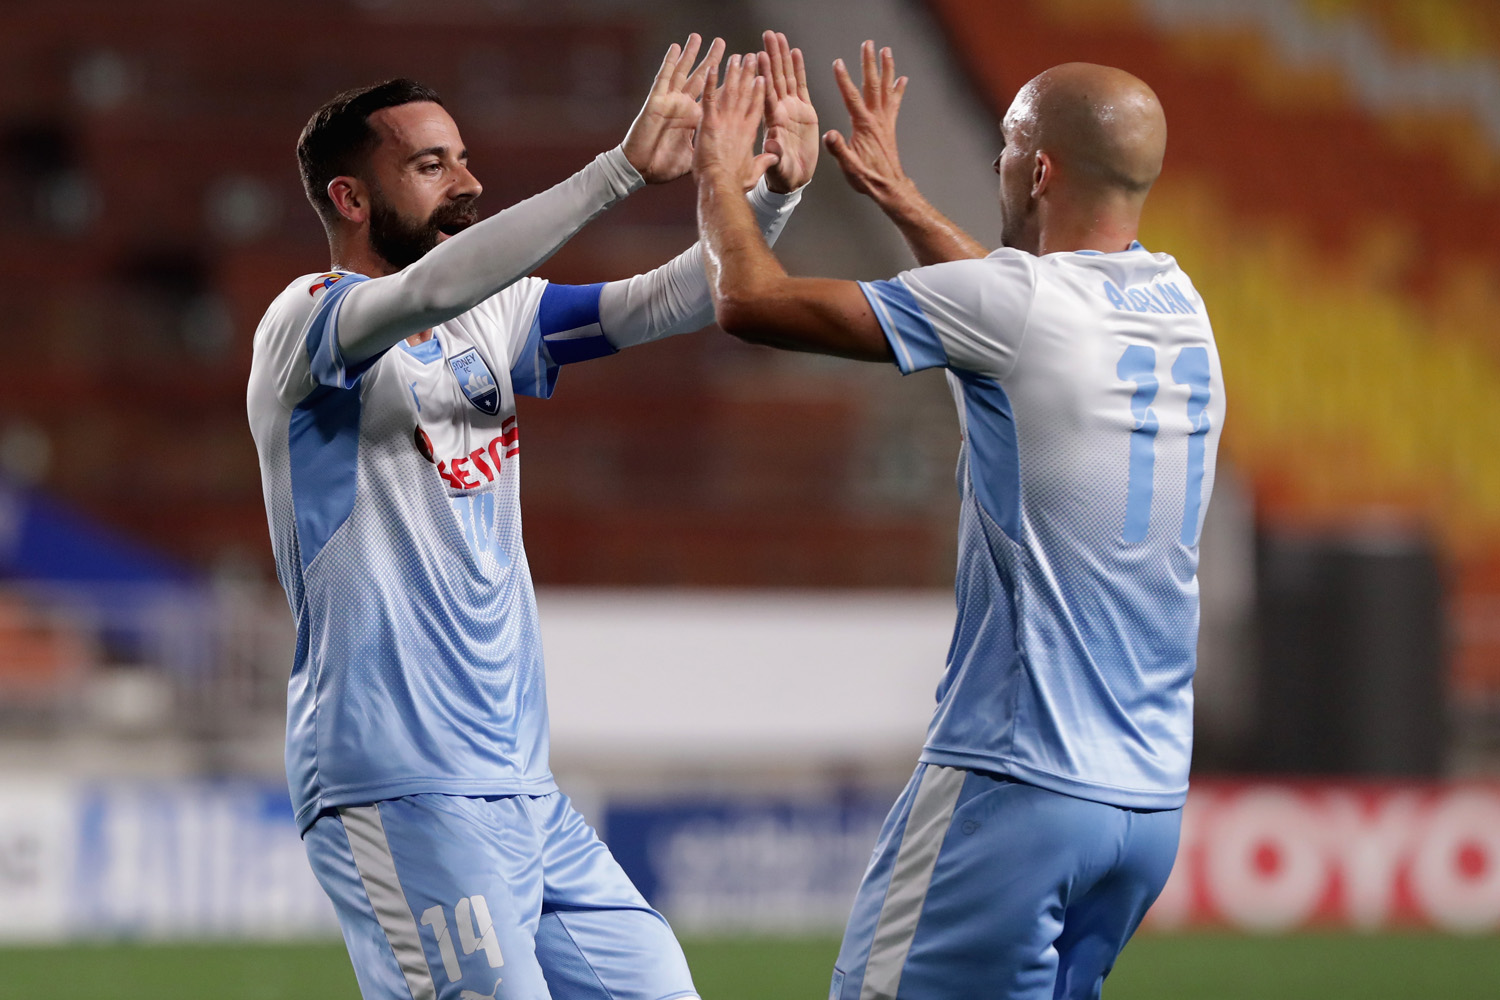 Brosque And Adrian Celebrate A Goal In Suwon